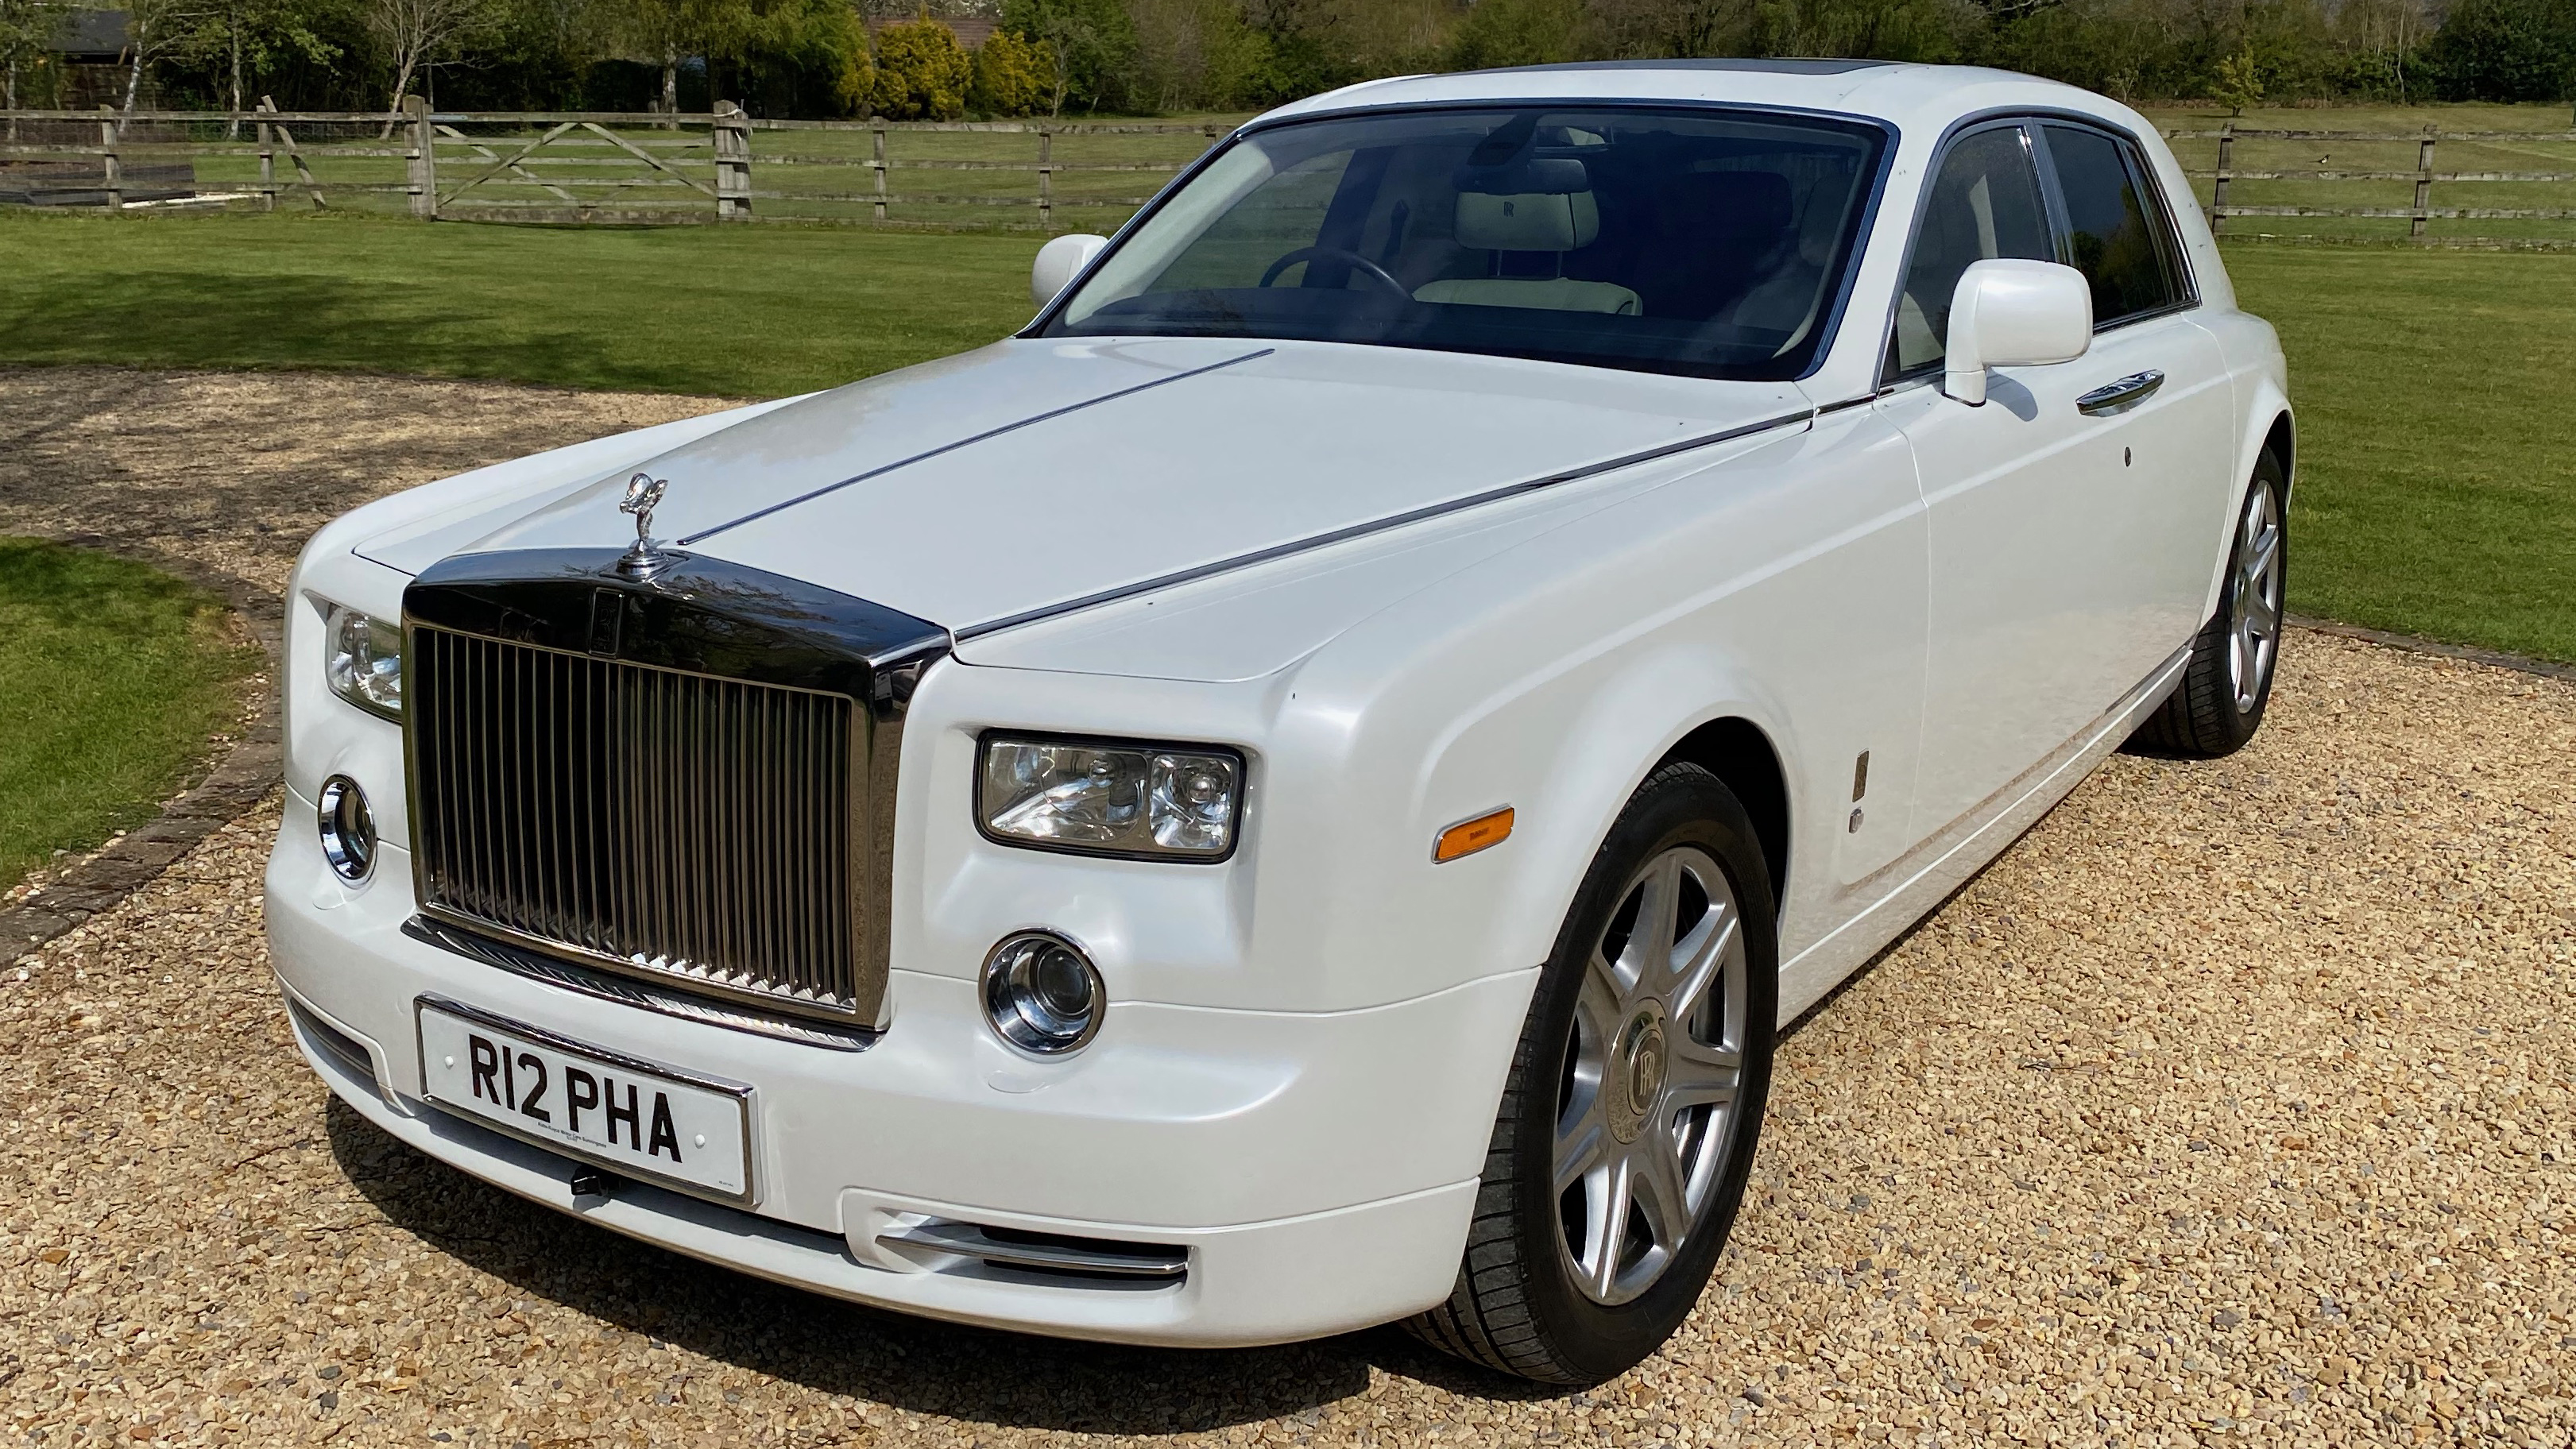 Front view of White Modern Rolls-Royce Phantom showing its iconic large chrome grill with spirit of Ecstasy mascot on top.